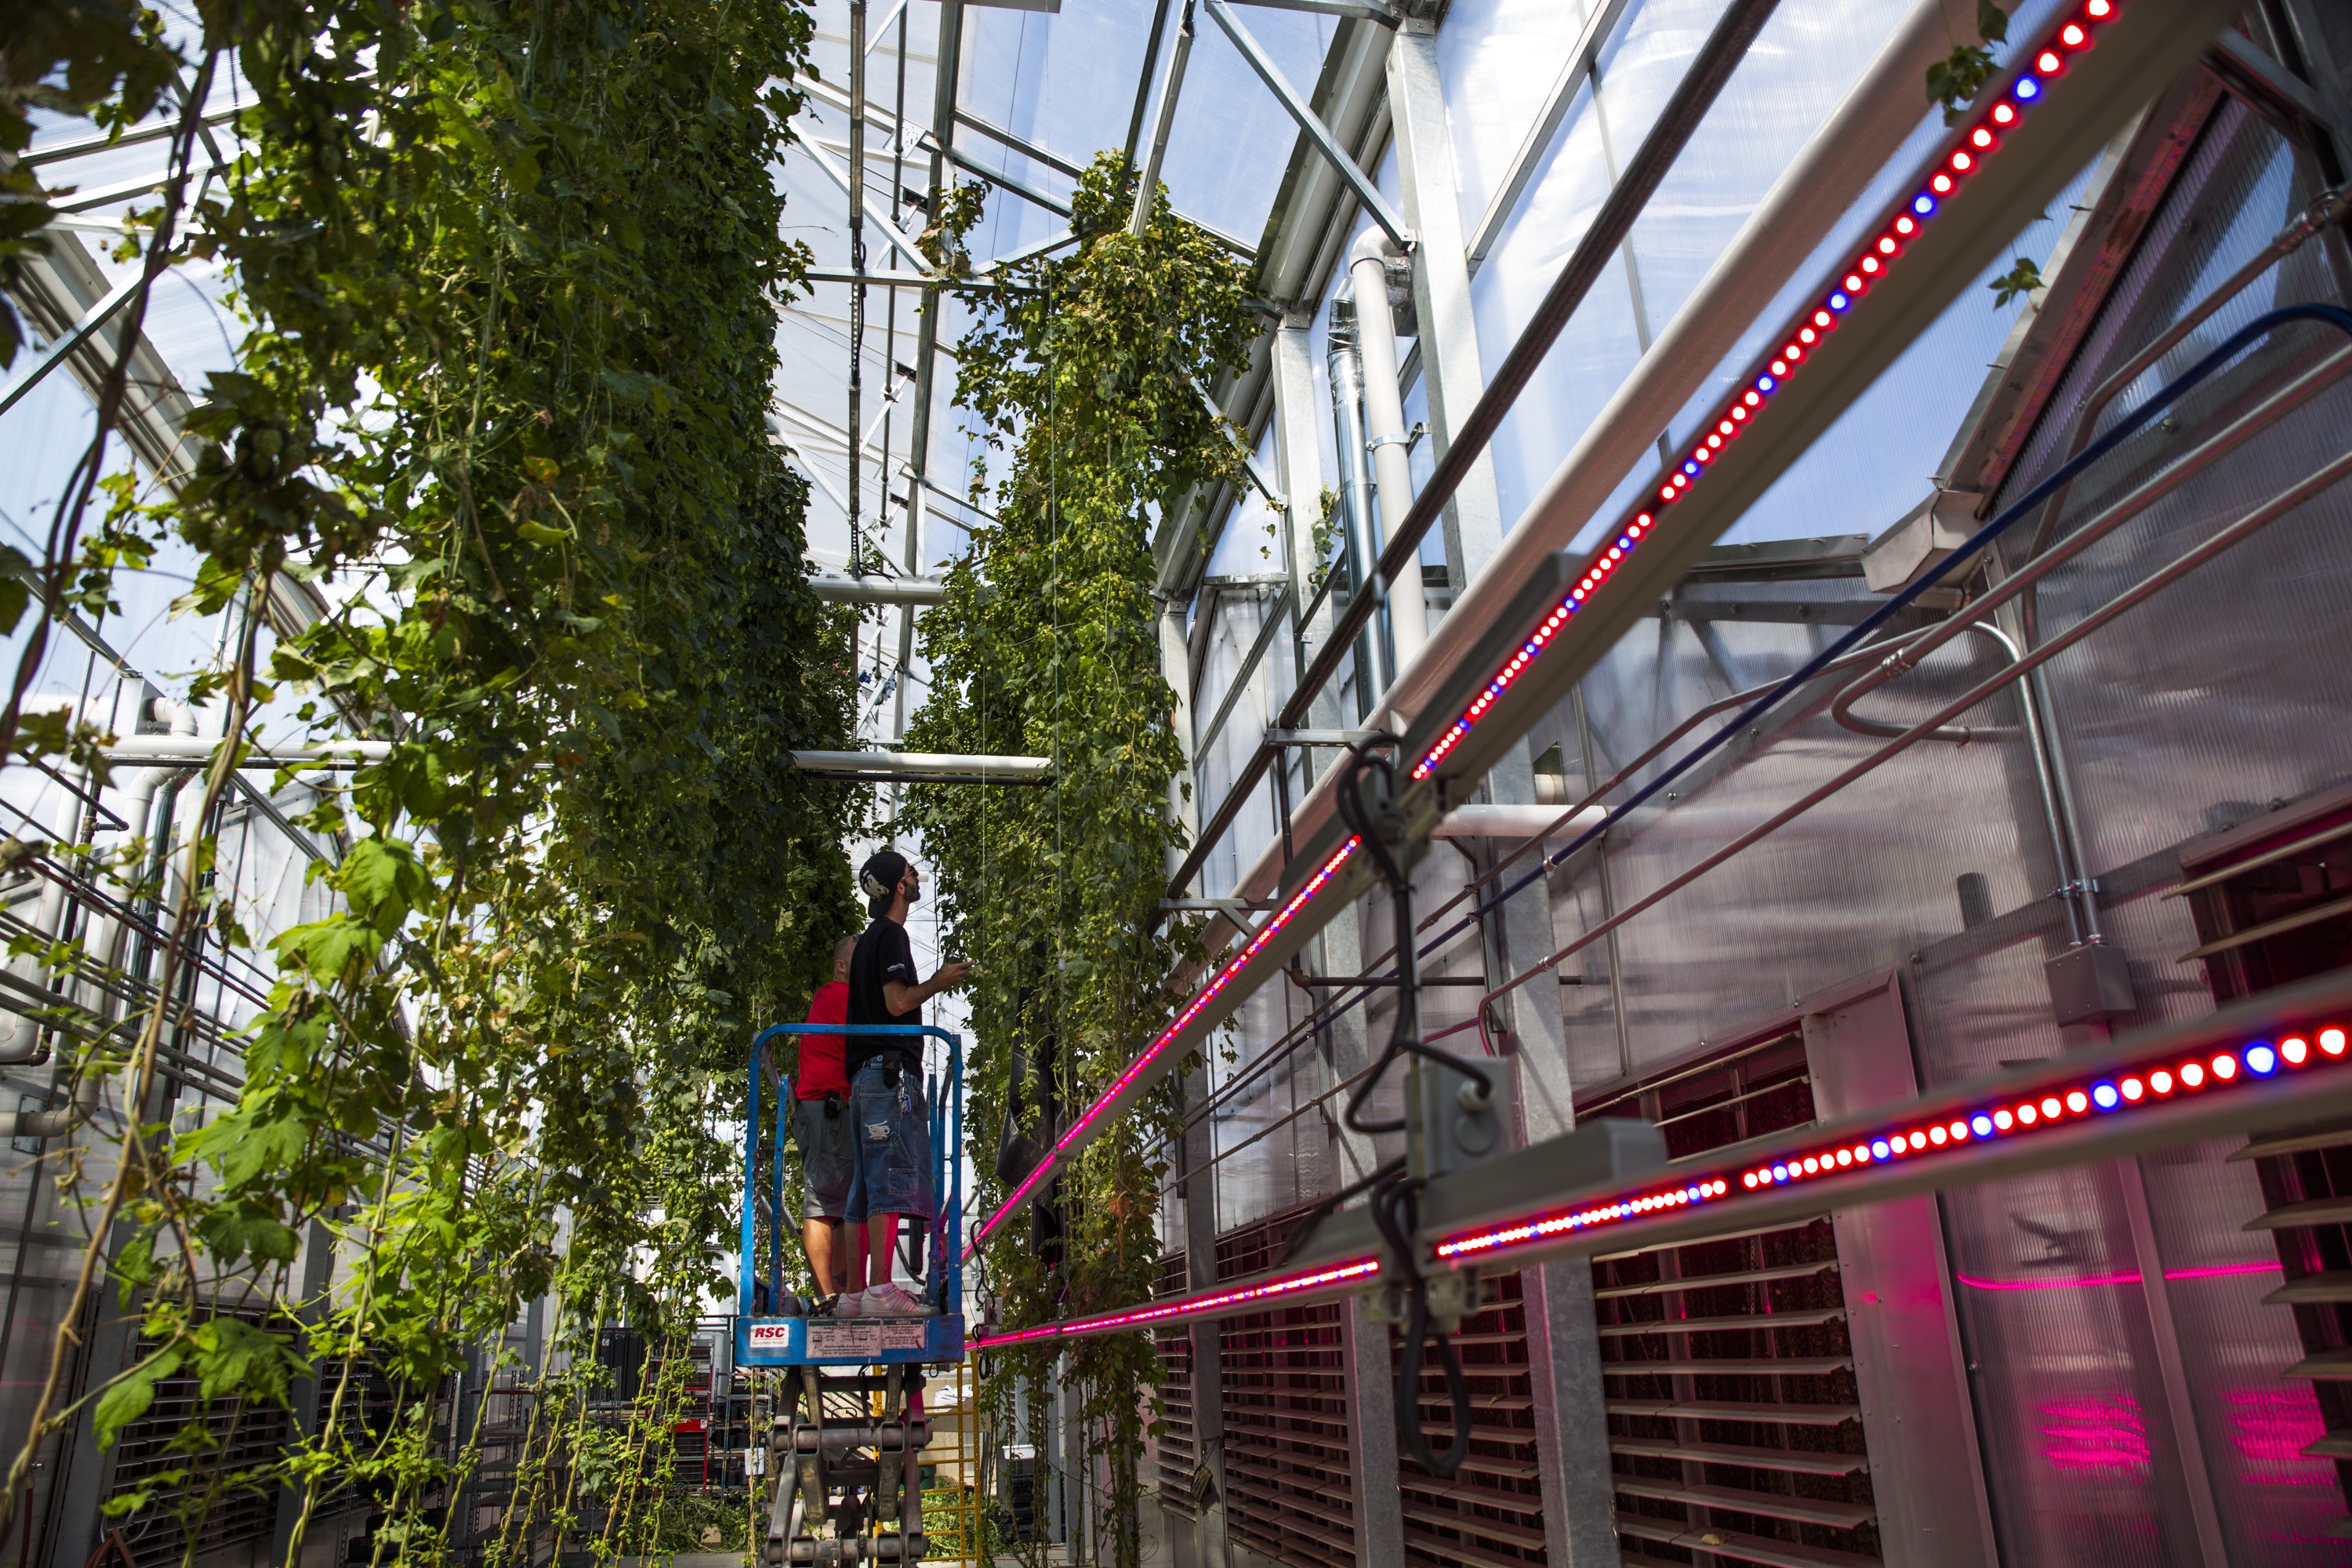 Staff in the horticulture department at Colorado State University harvest hydroponically grown hops from their facility on campus.